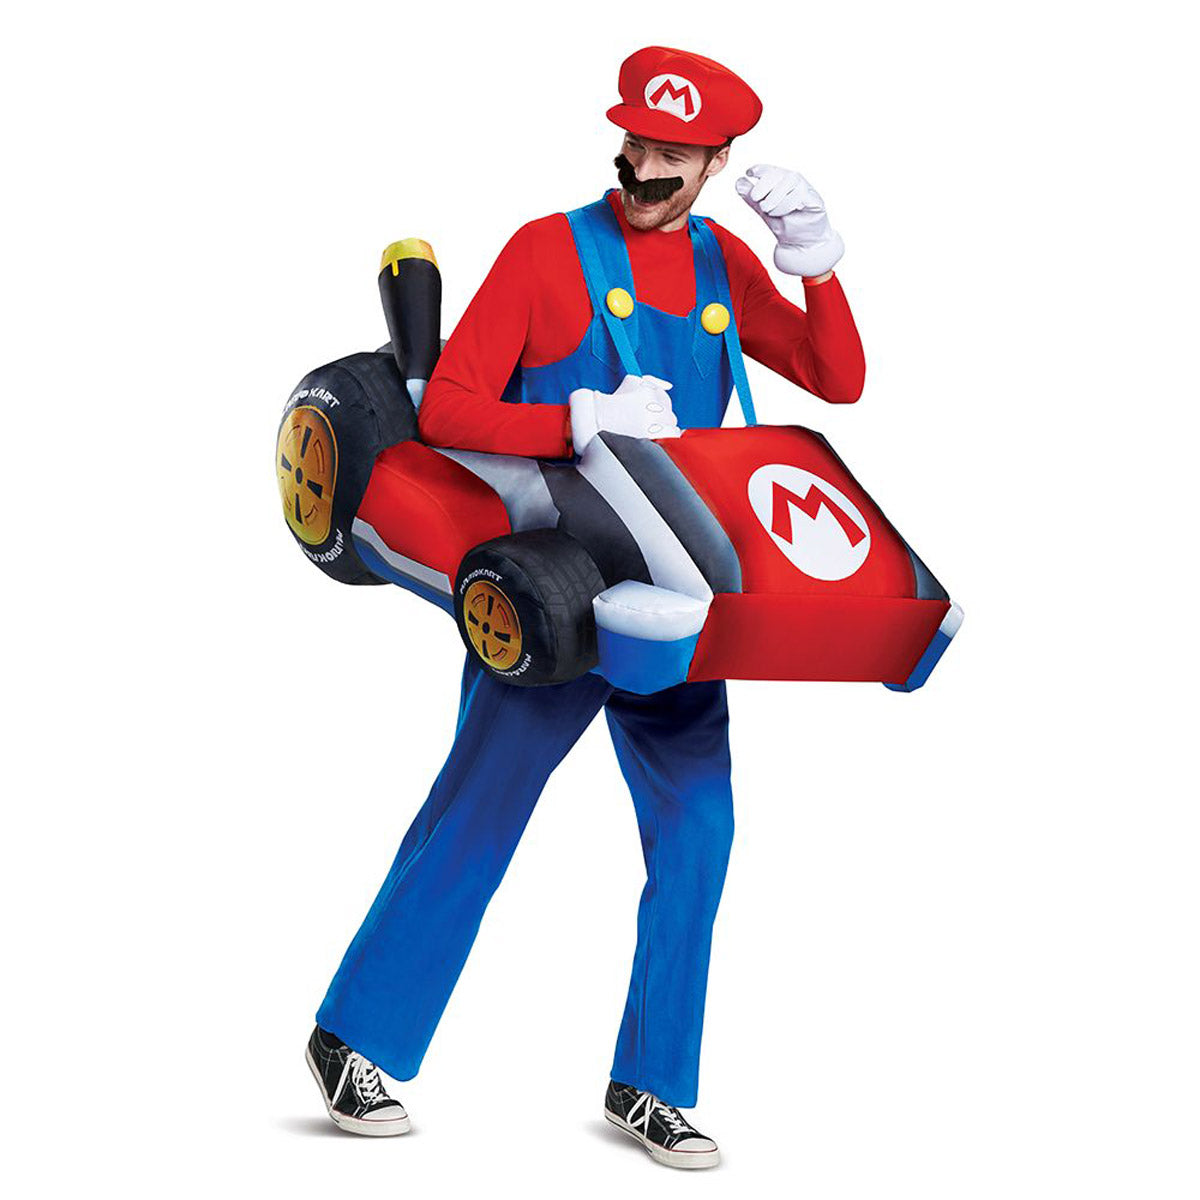 Mario Kart Inflatable Adult Costume Disguise 15674AD